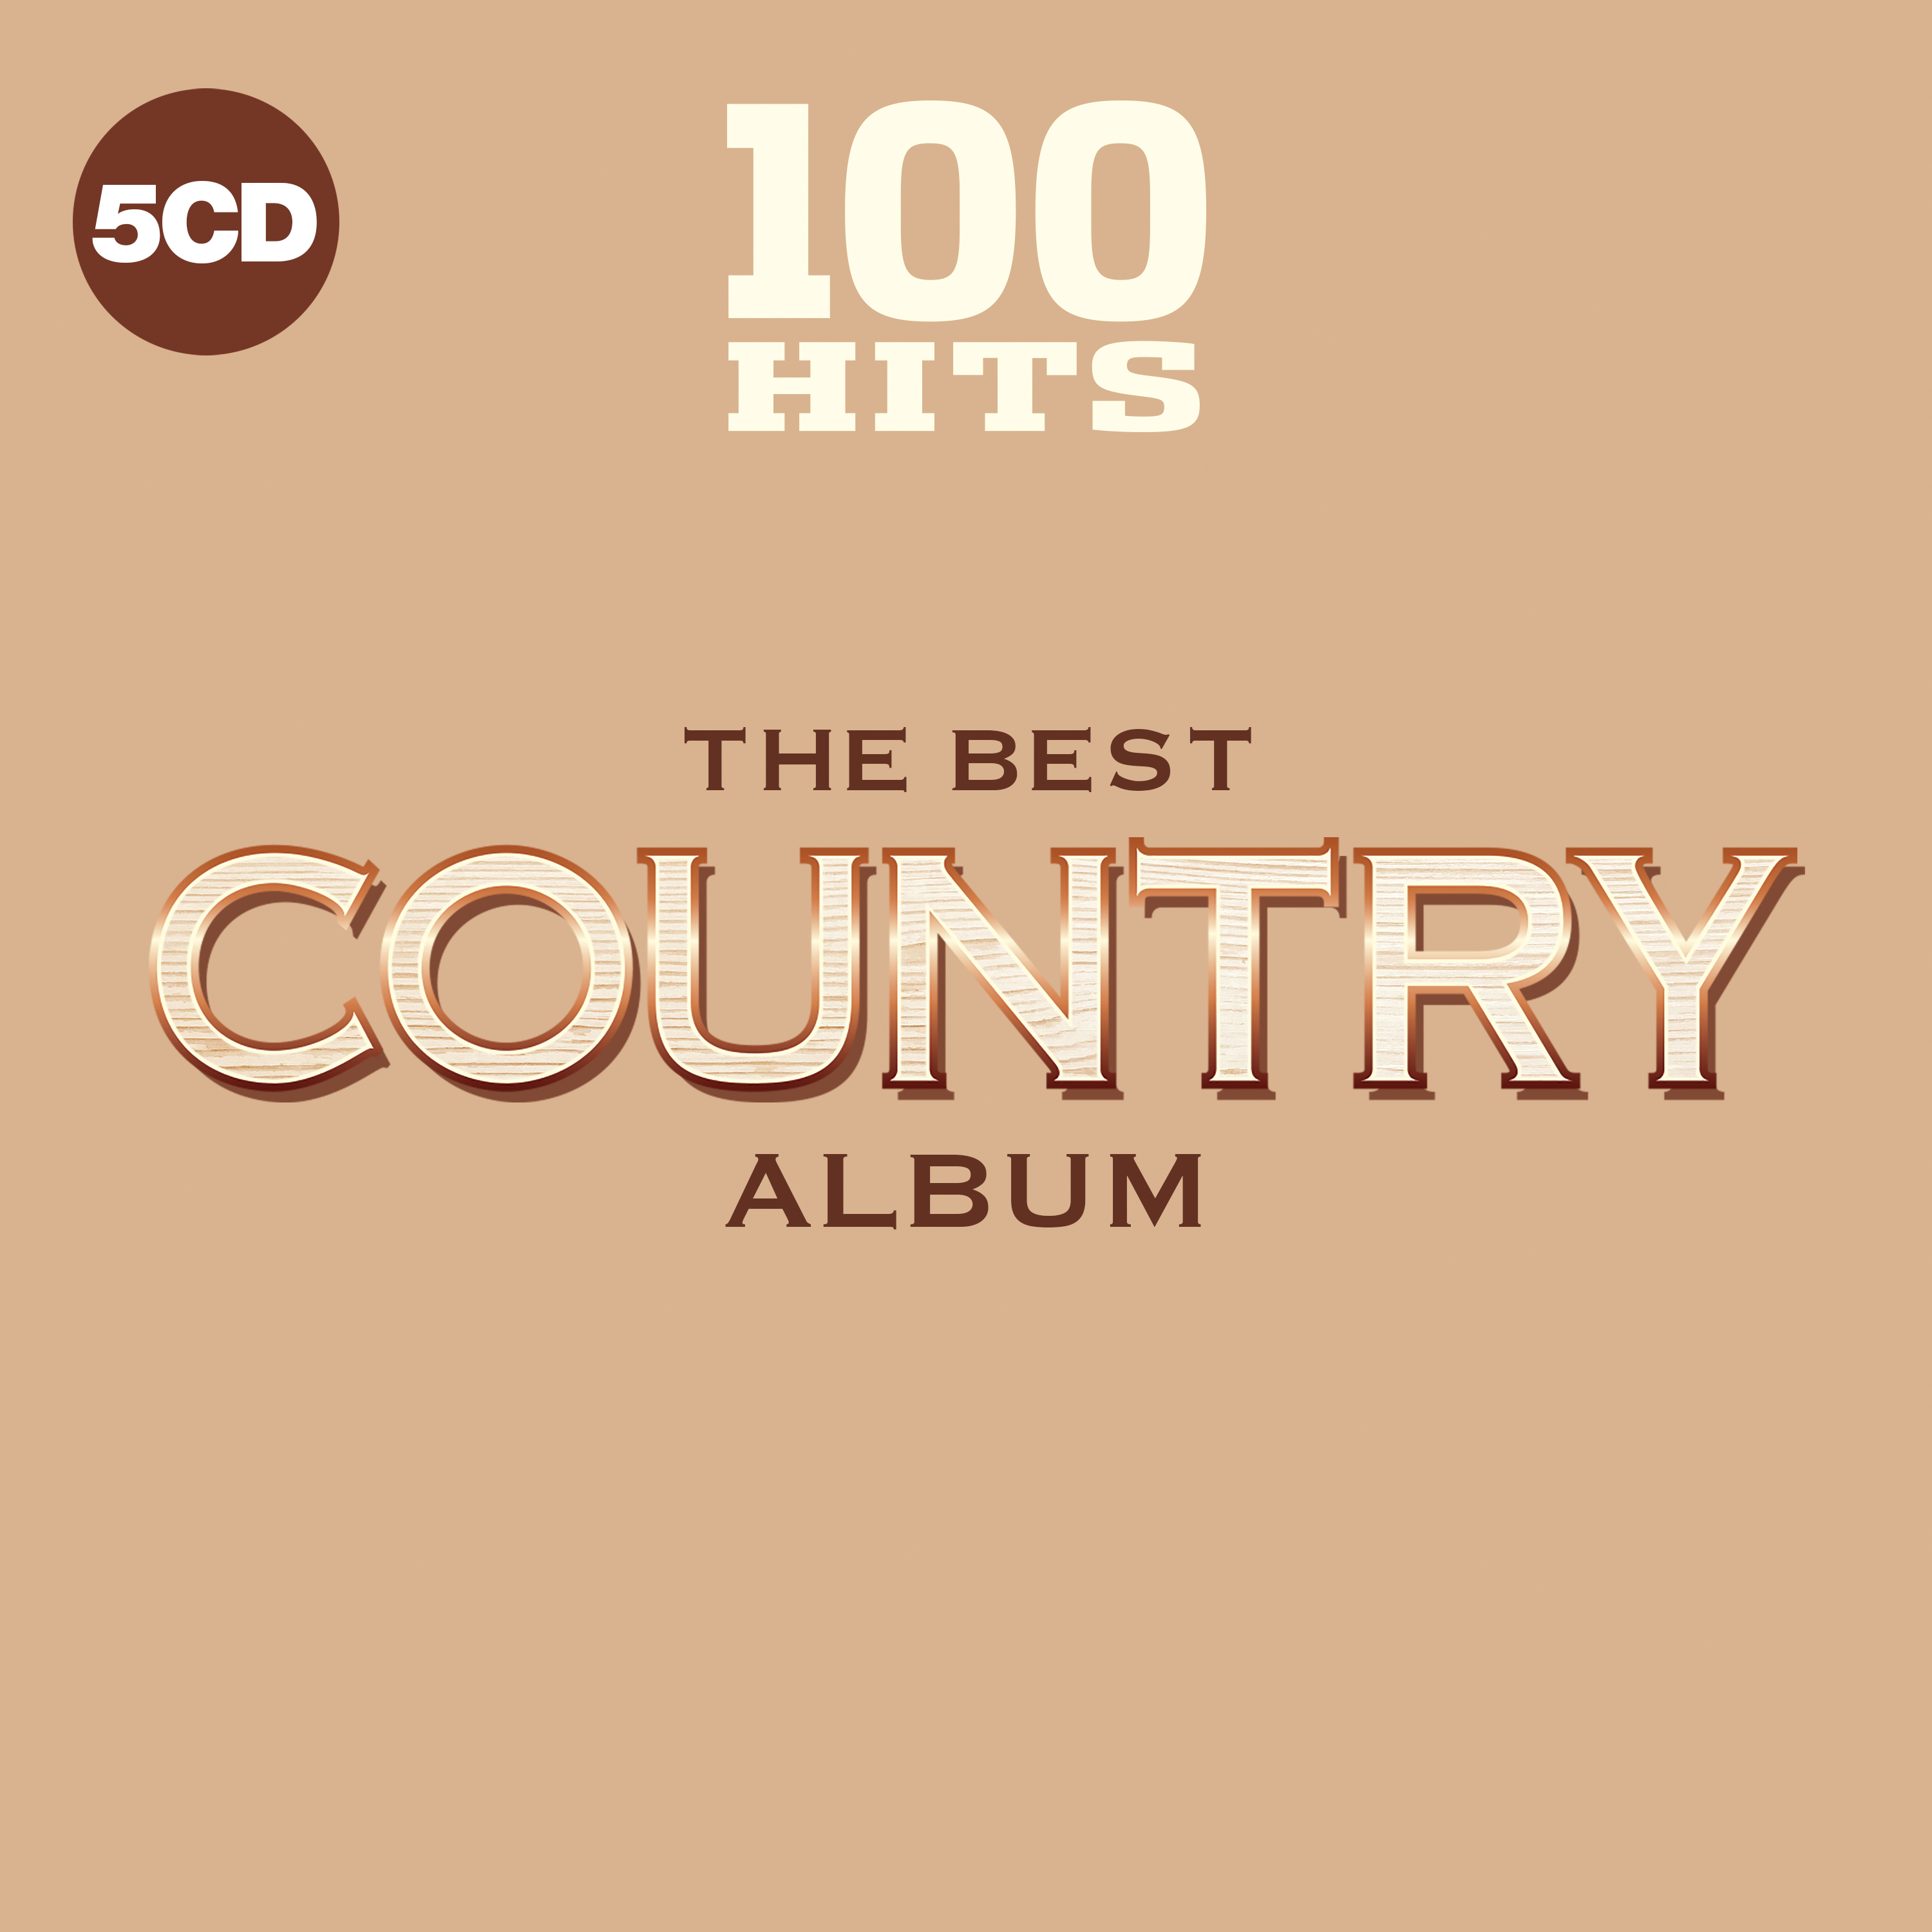 Flac 2018. 100 Hits CD. Country album. Best Country. 100 Hits the best 70s album [5cd] (2018).